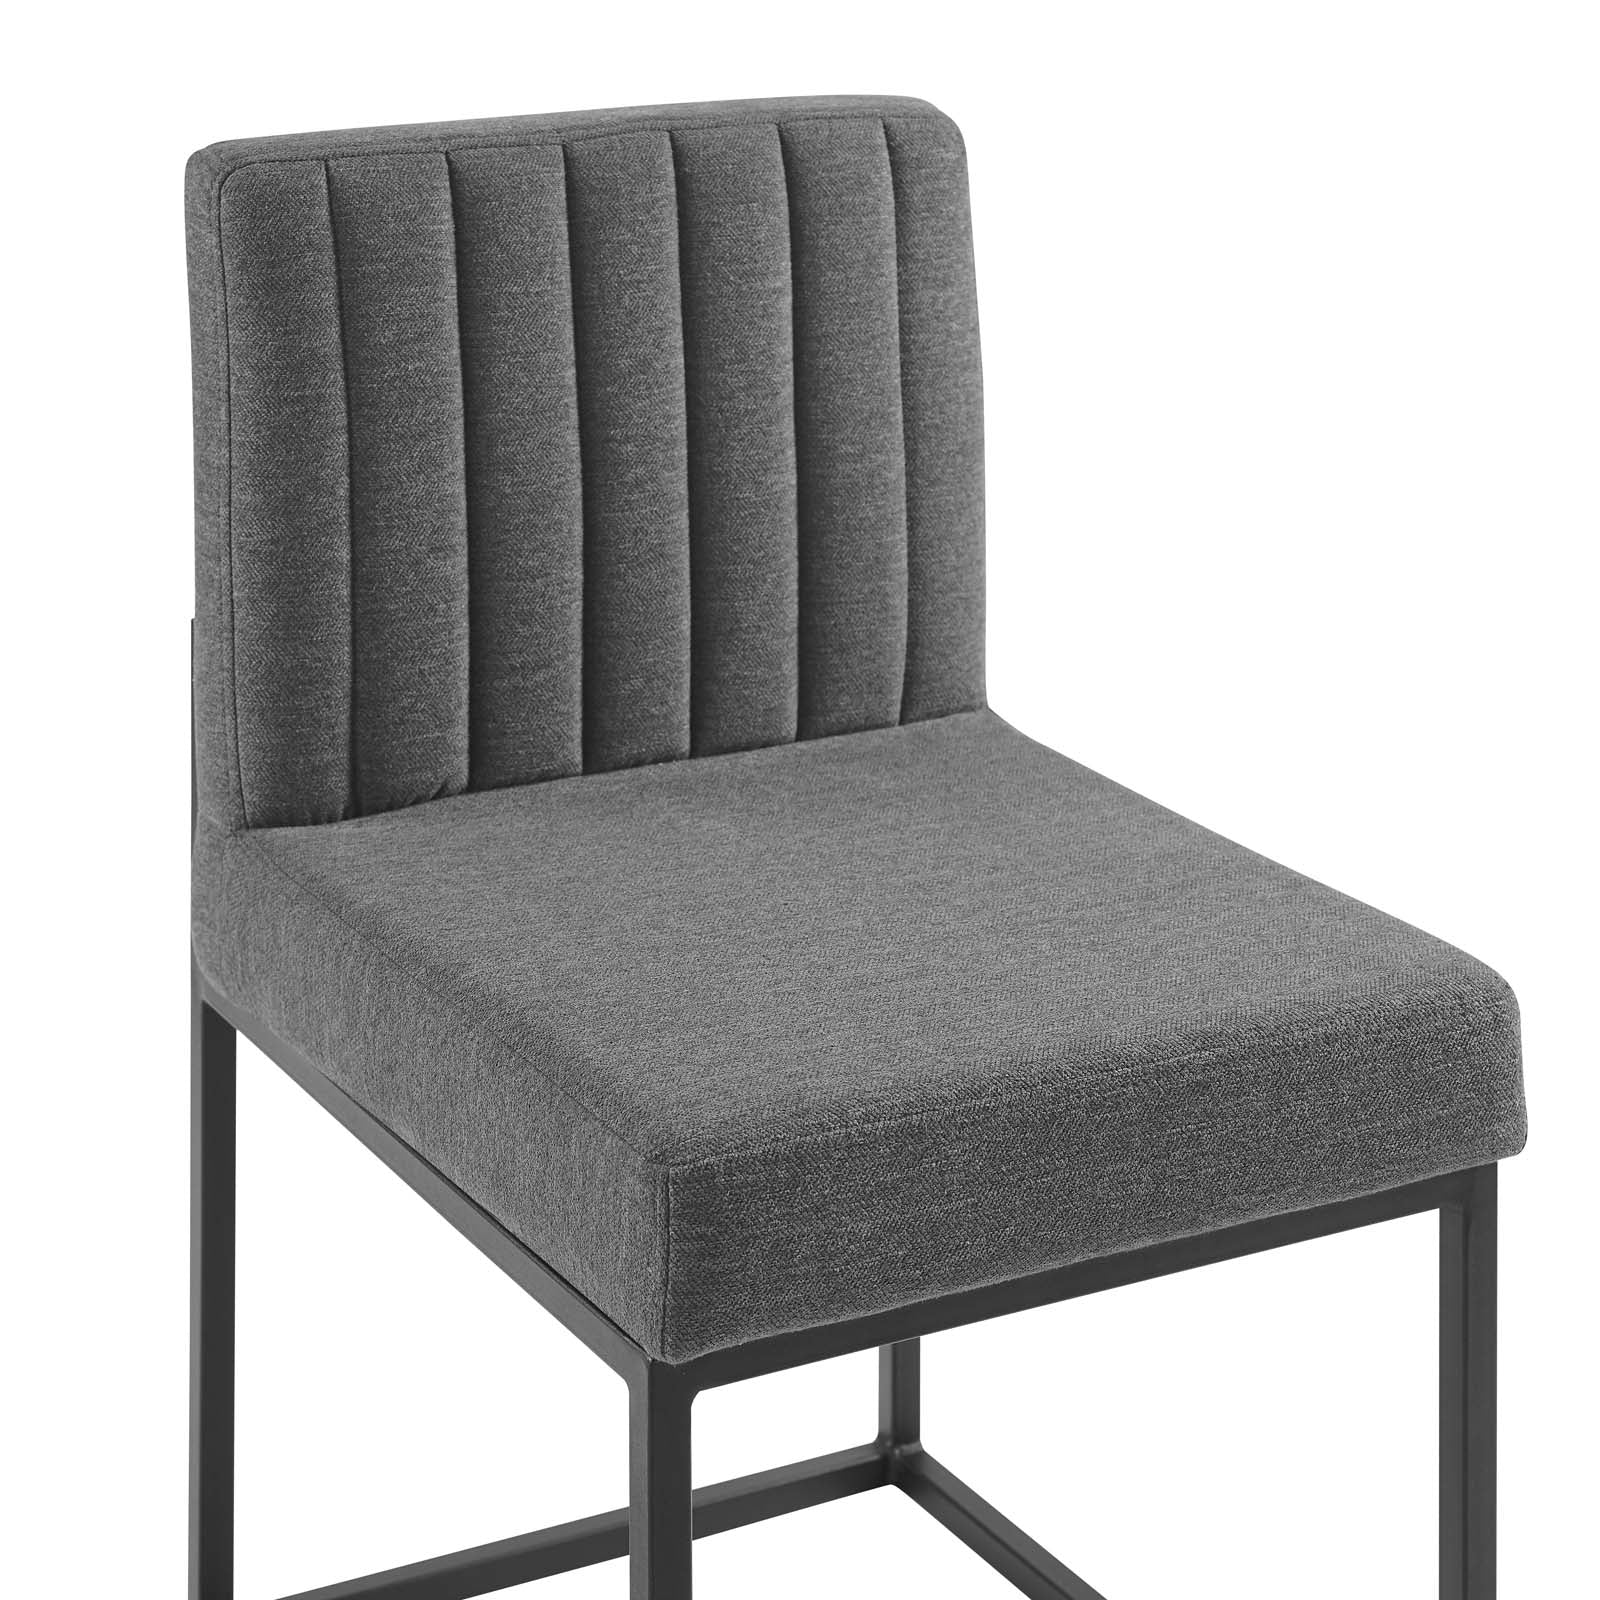 Modway Dining Chairs - Carriage Channel Tufted Sled Base Upholstered Fabric Dining Chair Black Charcoal